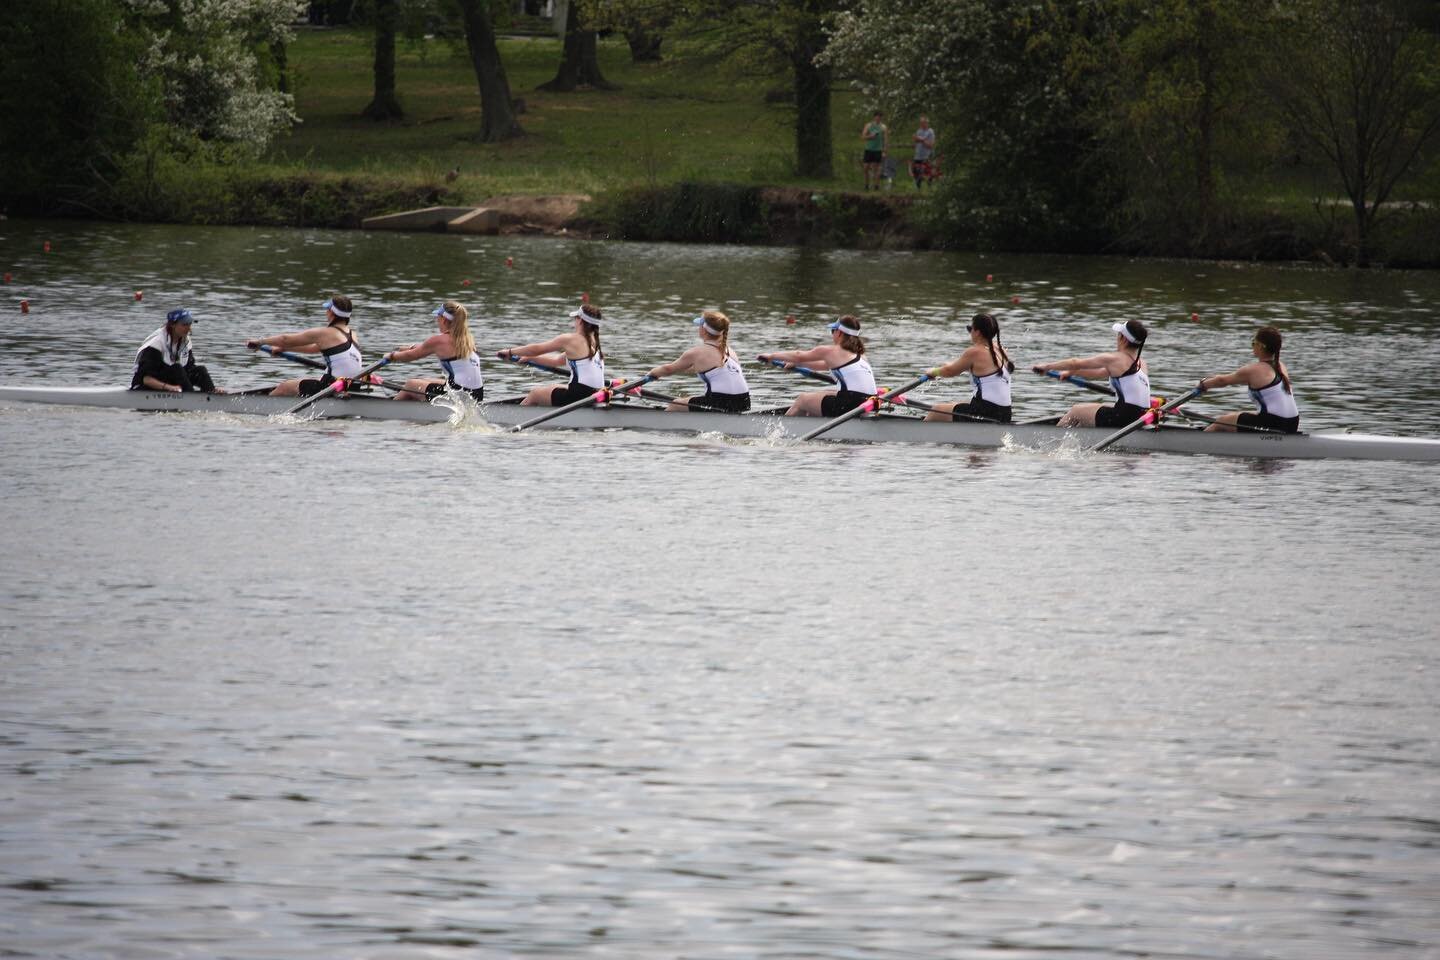 Some strong racing this weekend, with the Stockton Women&rsquo;s V8 coming away with a second crew of the week award for the season!

The Stockton women won the D3 Varsity 8 at the Knecht Cup over multiple conference rivals this weekend, a first Knec